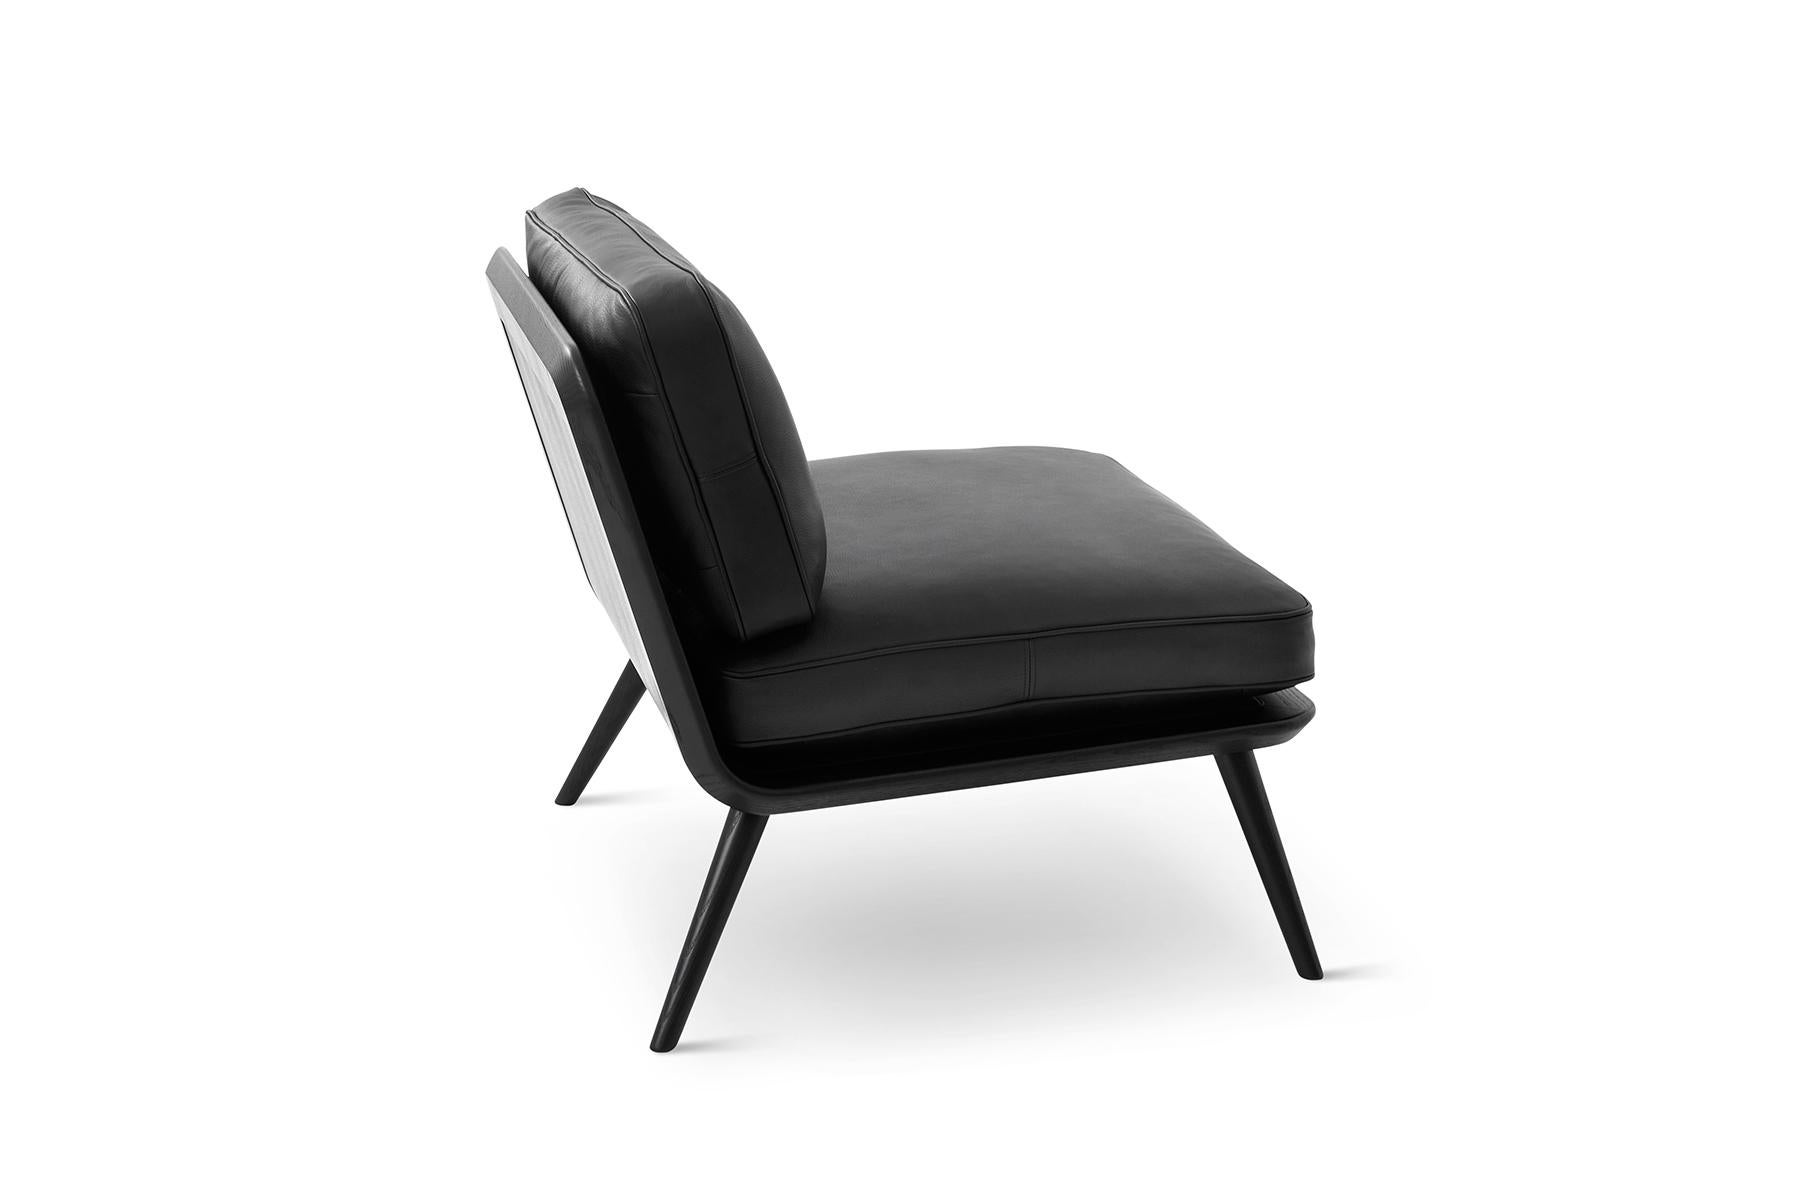 Space Copenhagen spine lounge suite chair pays respect to the traditions of hand upholstering to which Fredericia built its name on, while offering a modern flavor in its own succinct and simple way.